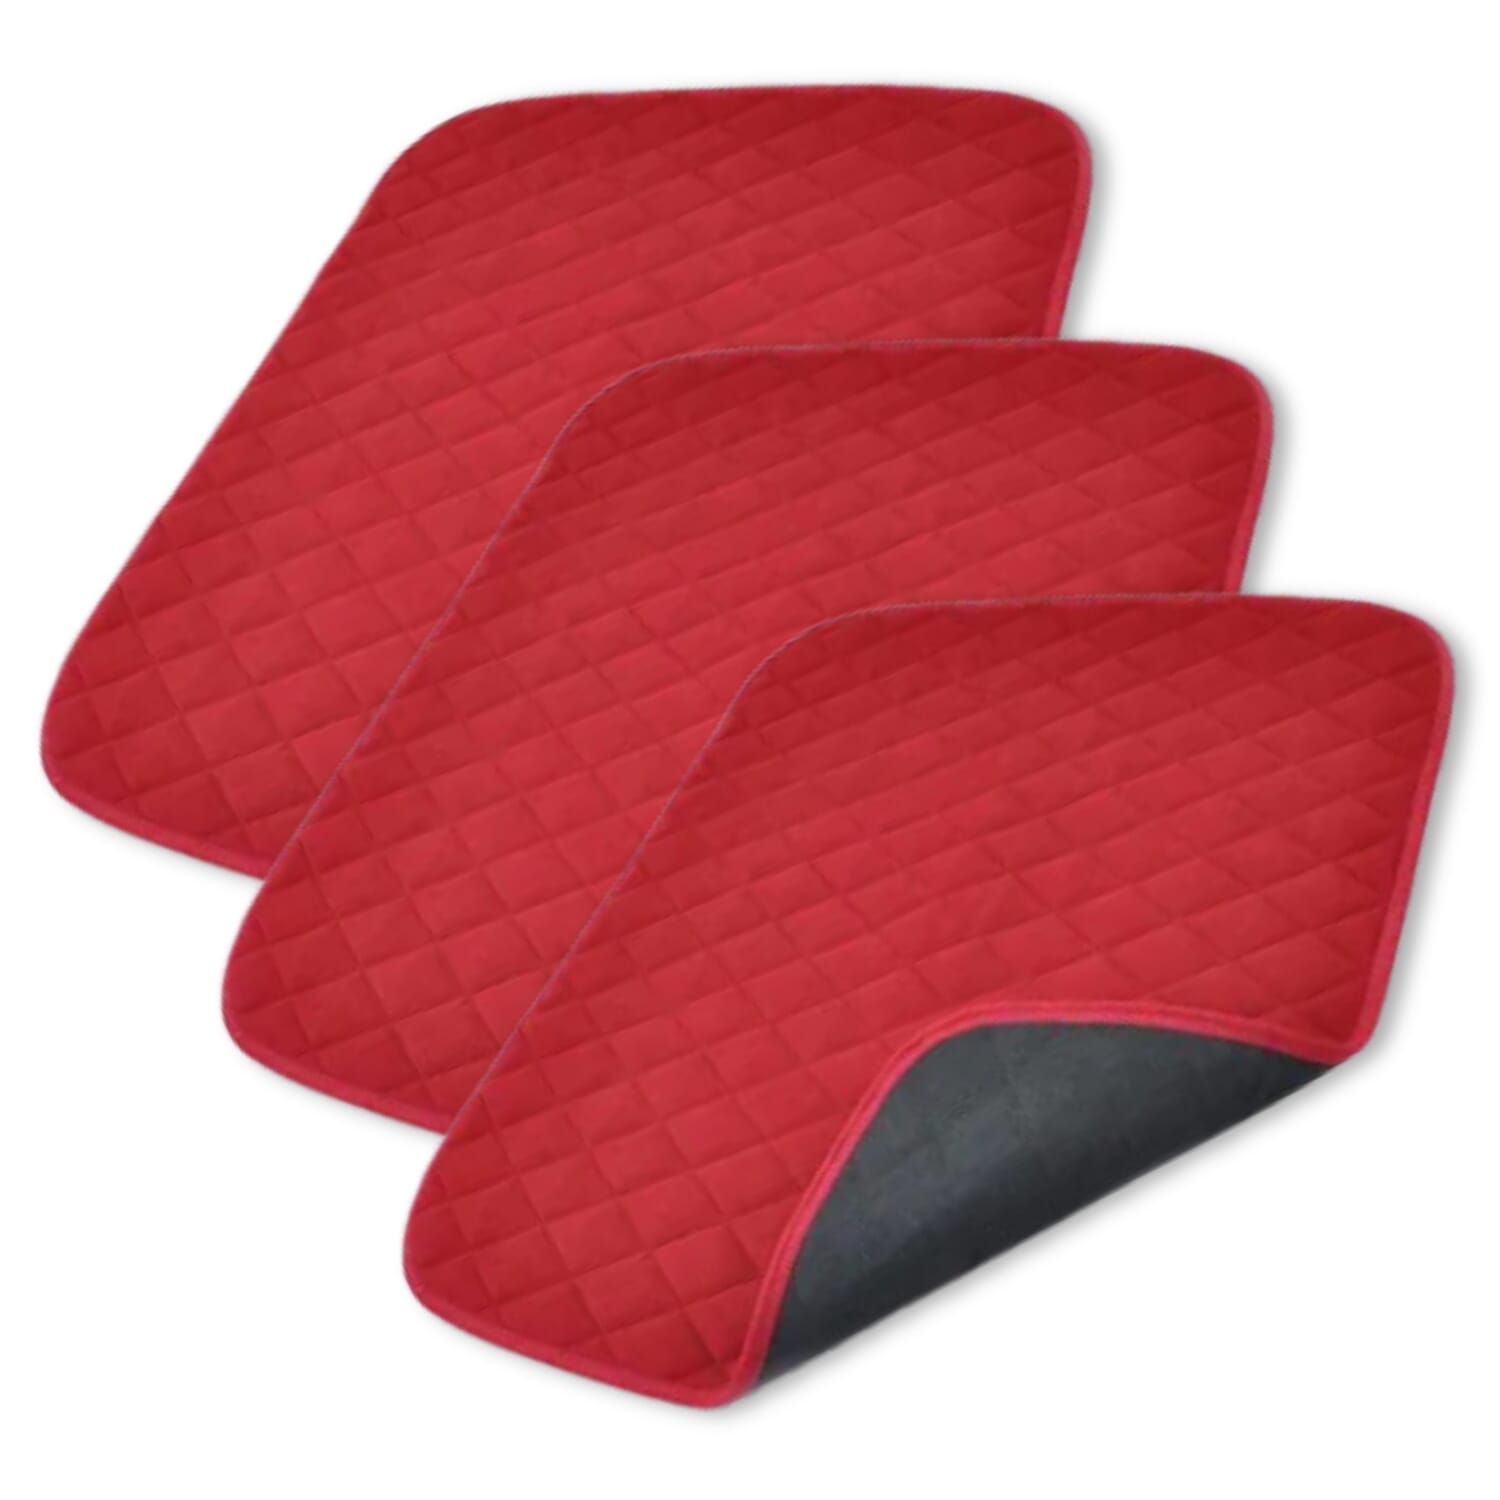 View Vida Washable Chair Pad Wine Pack of 3 information